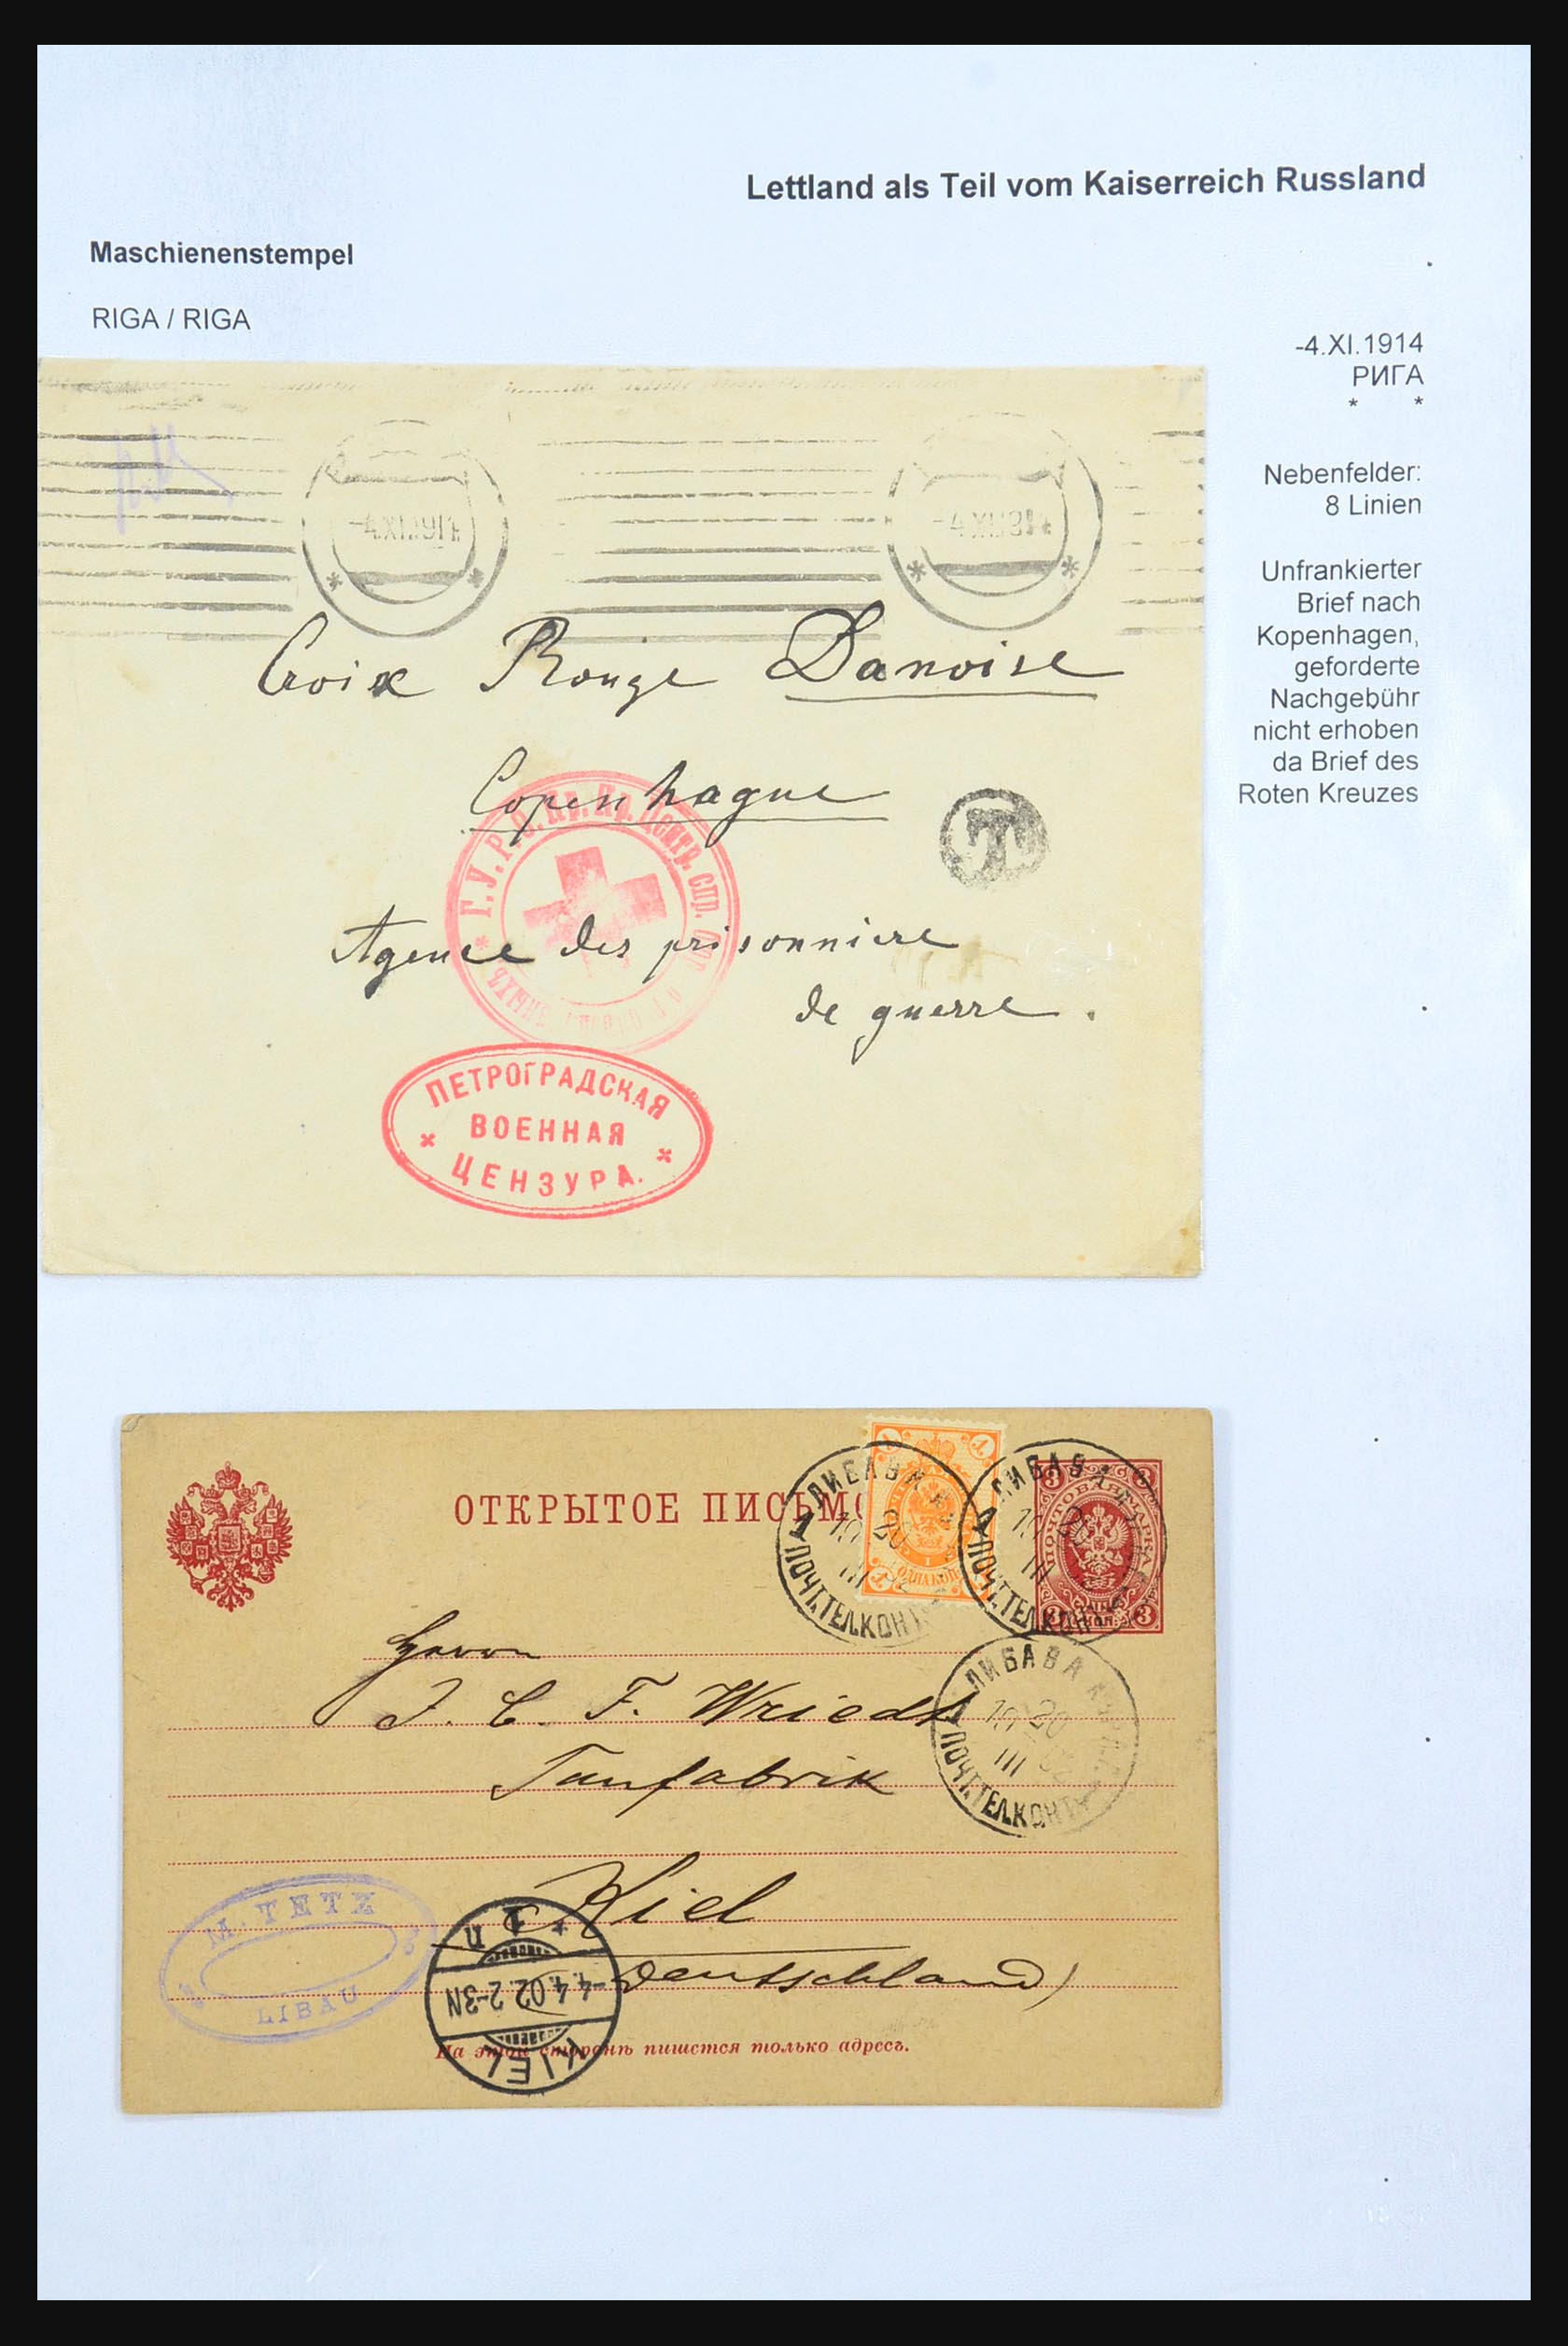 31305 138 - 31305 Latvia as part of Russia 1817-1918.